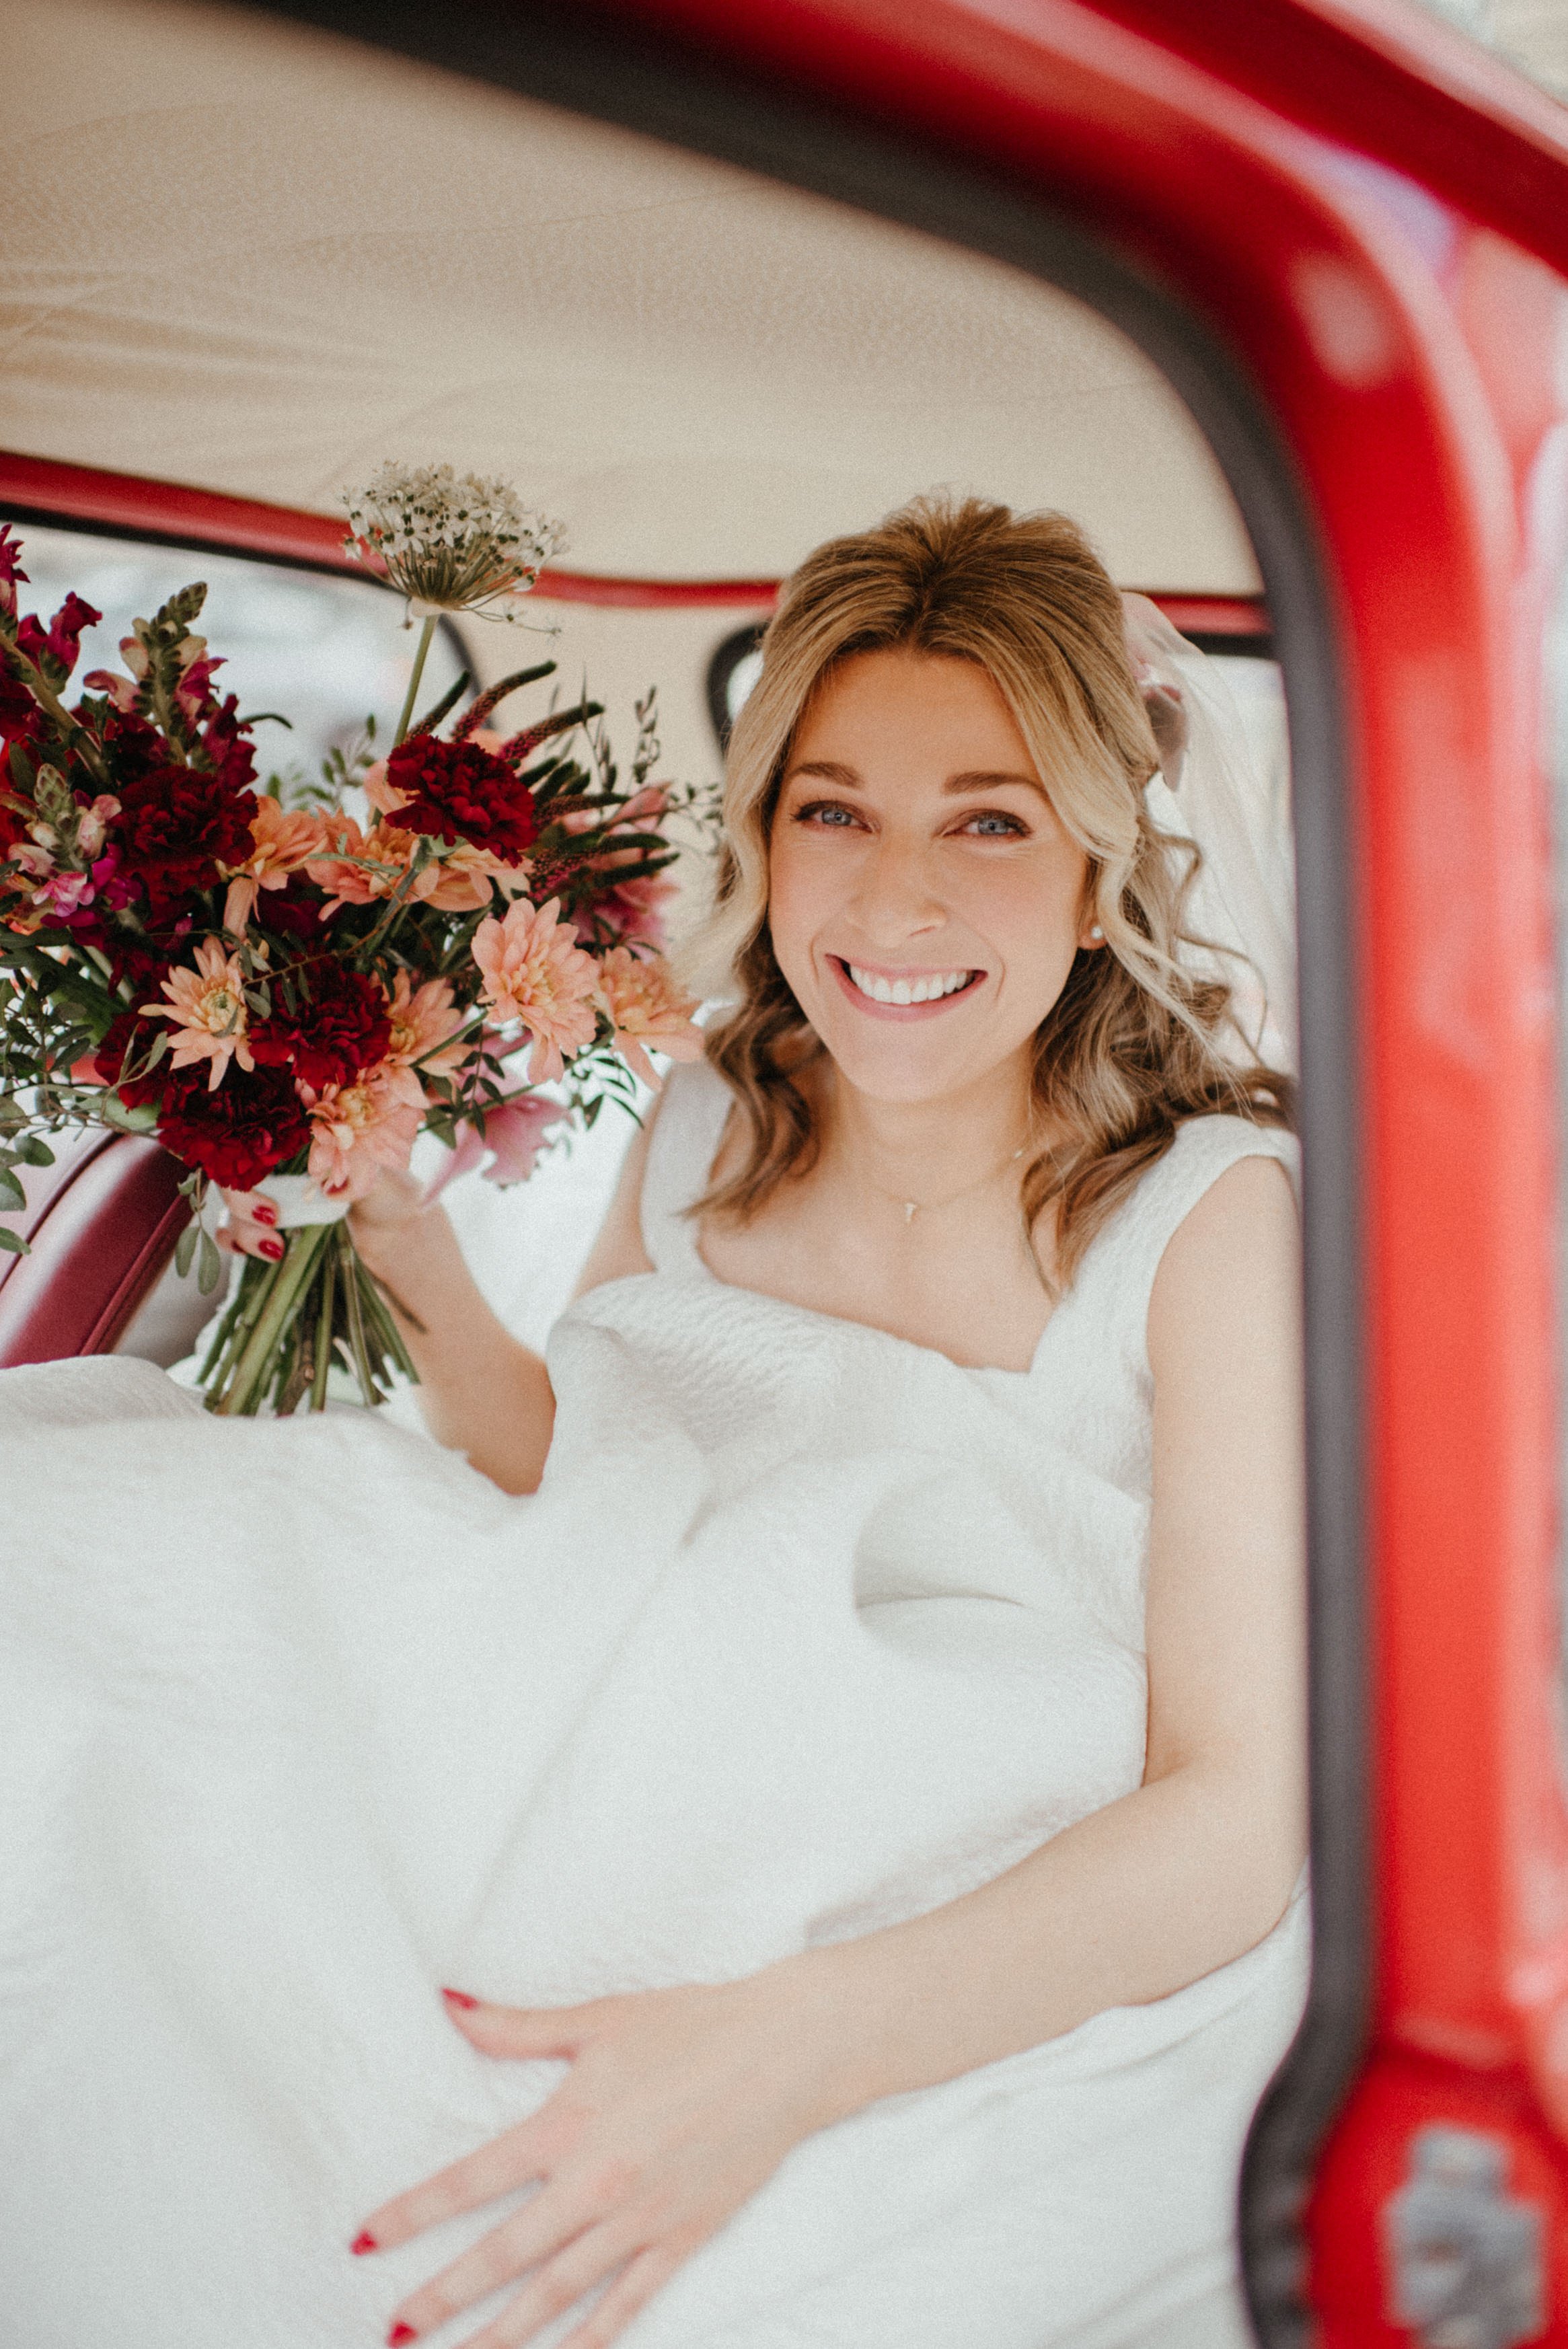  Modern wedding florals can be seen in the autumnal bridal bouquet, held by the bride who is sat in the back of a red car.  Photo by Lisa Devine Photography 